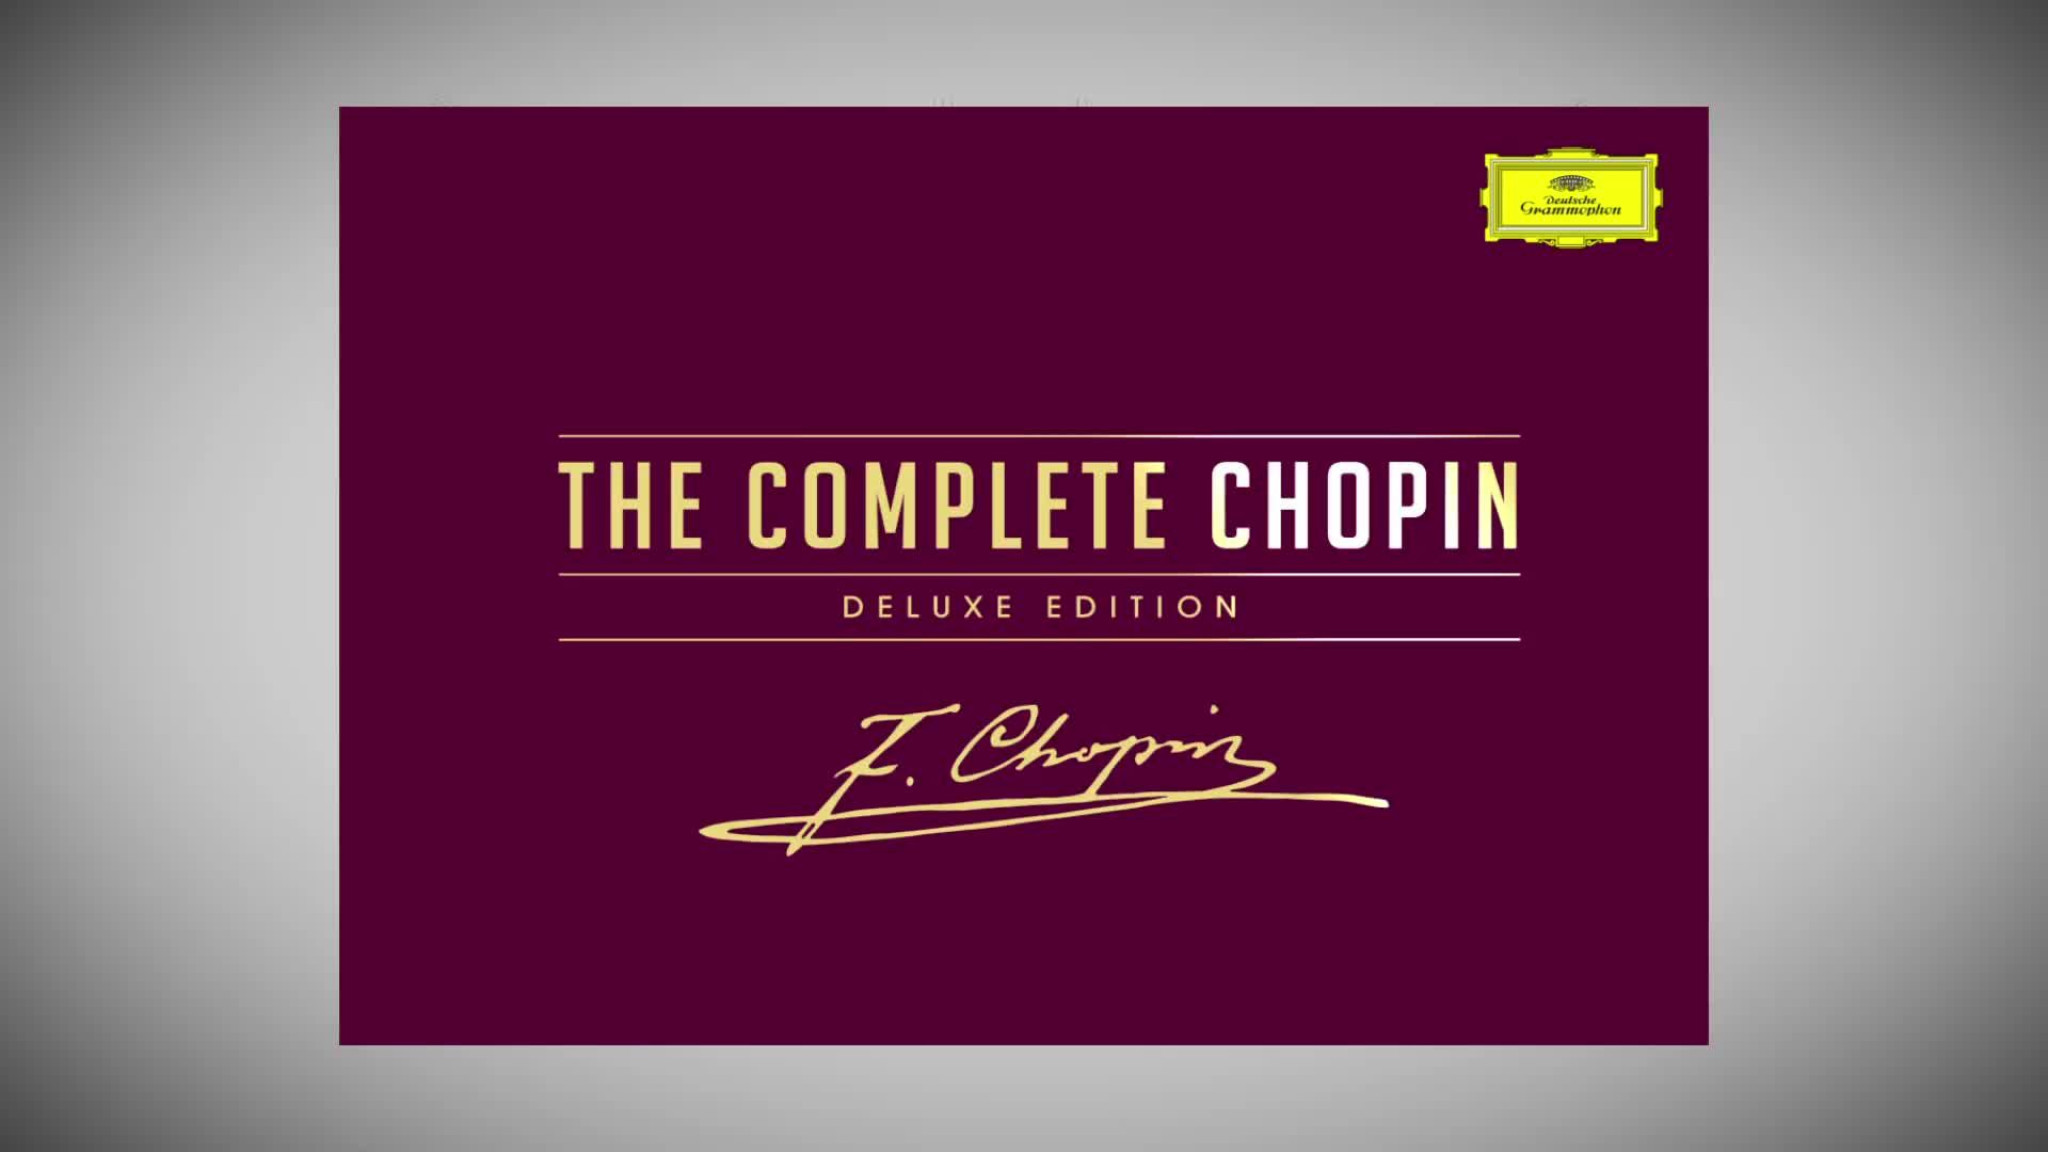 The Complete Chopin - Deluxe Edition (Trailer)